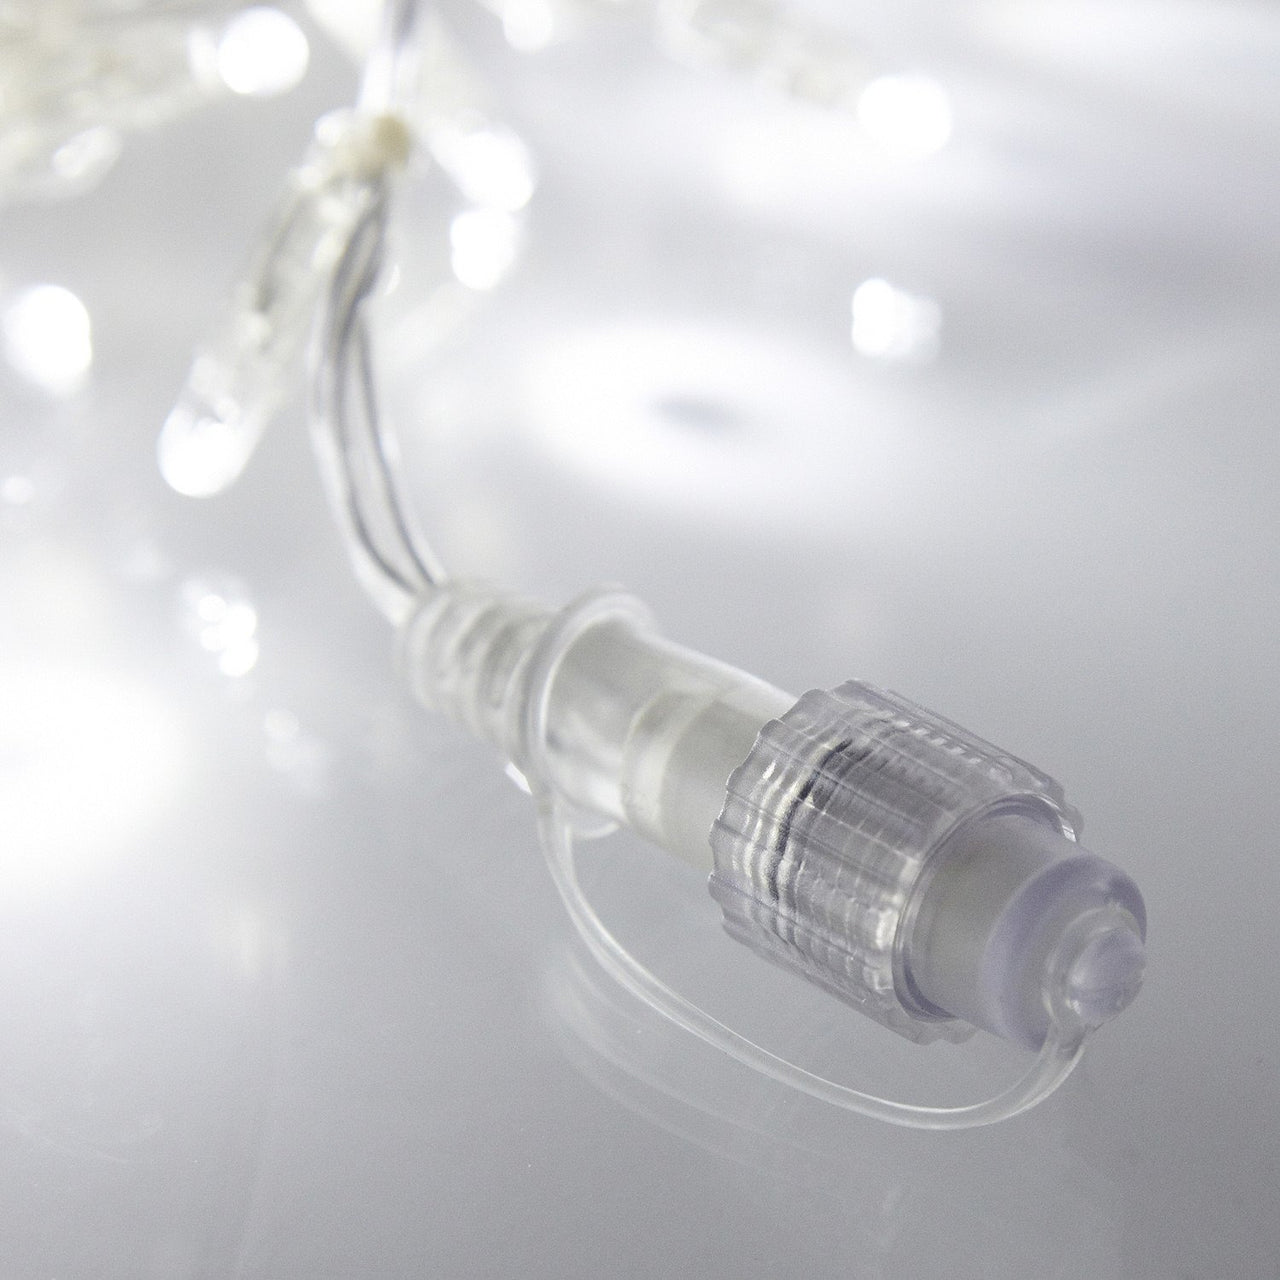 Core Connect 30m 300 White Connectable Fairy Lights Clear Cable